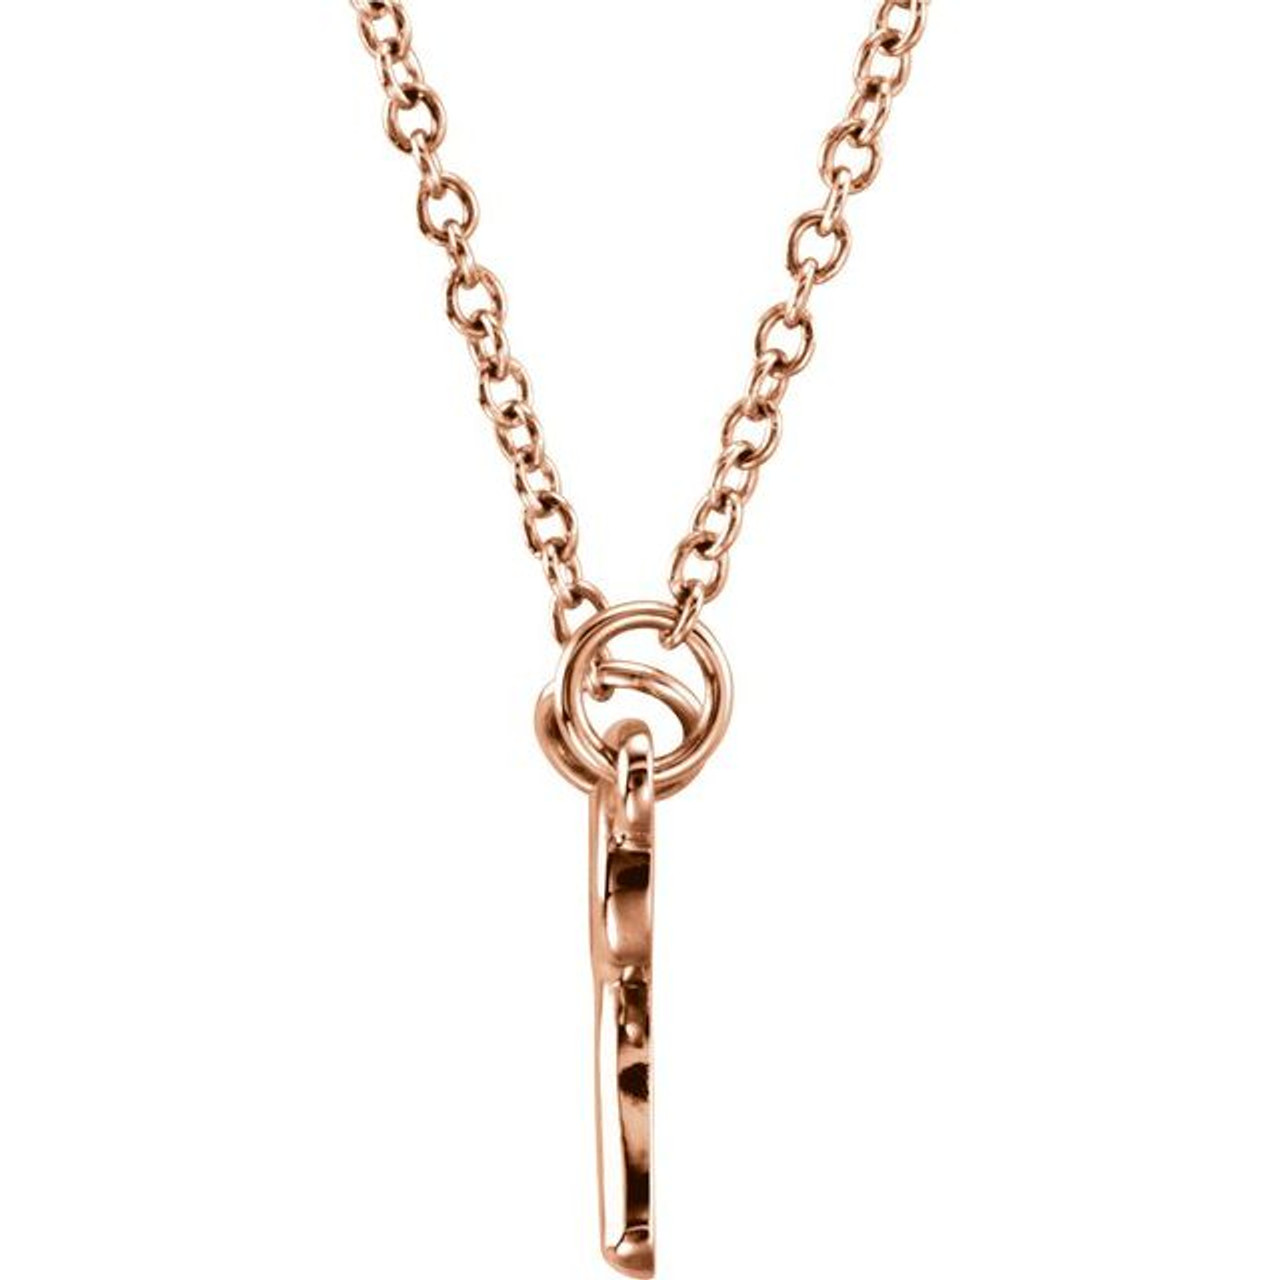 Juicy Couture Necklace.rose Gold Ton Necklace.link Necklace. Bow Charm  Necklace.pave Bow Necklace.gift Jewelry for Her 